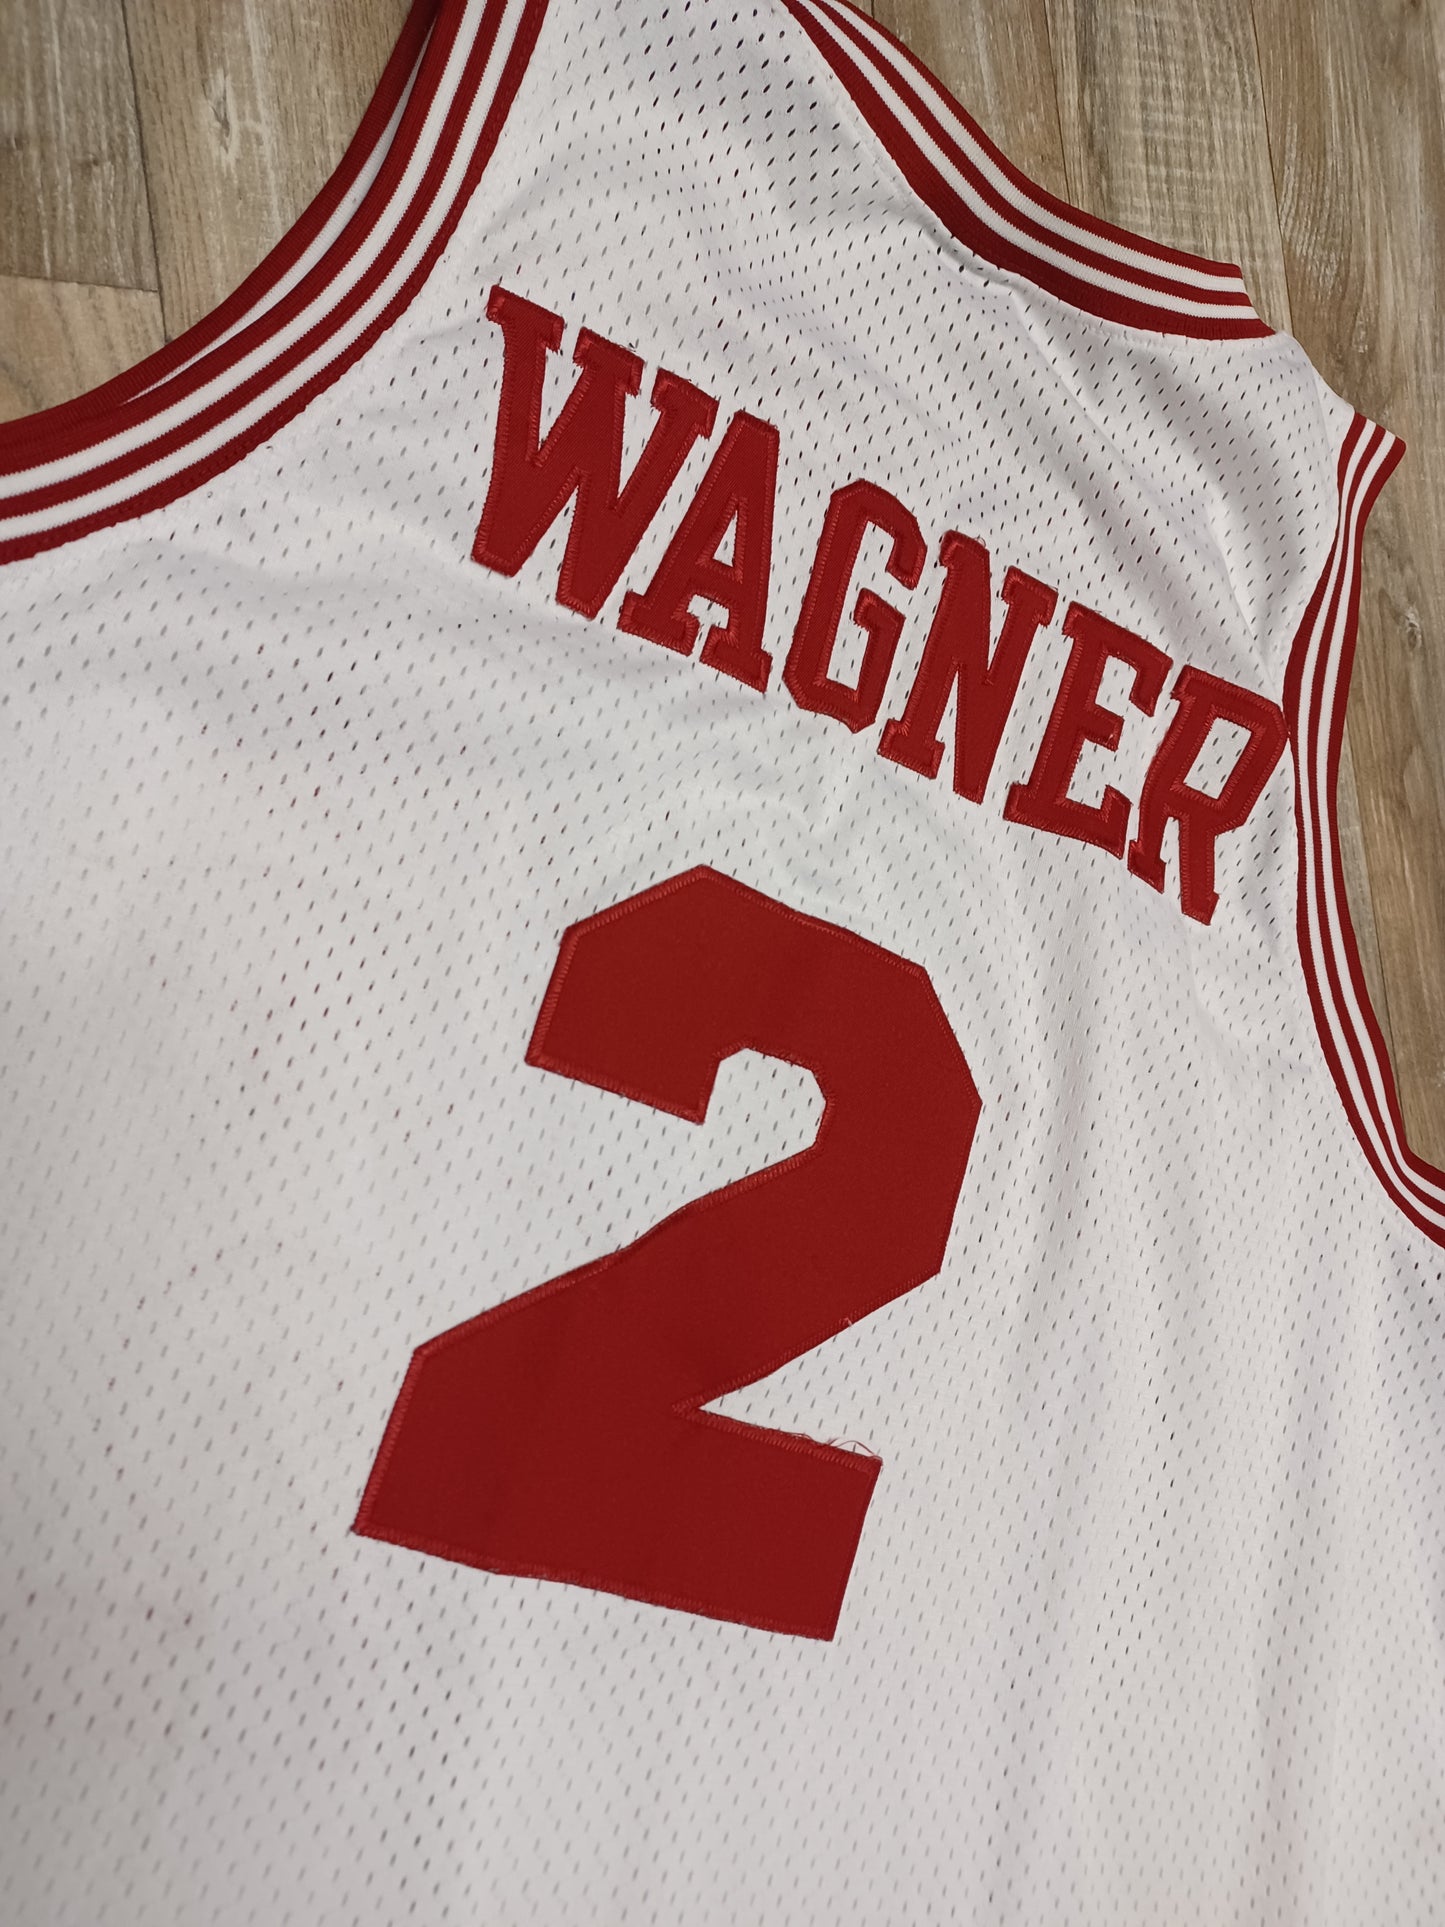 Dajuan Wagner Cleveland Cavaliers Jersey Size 3XL